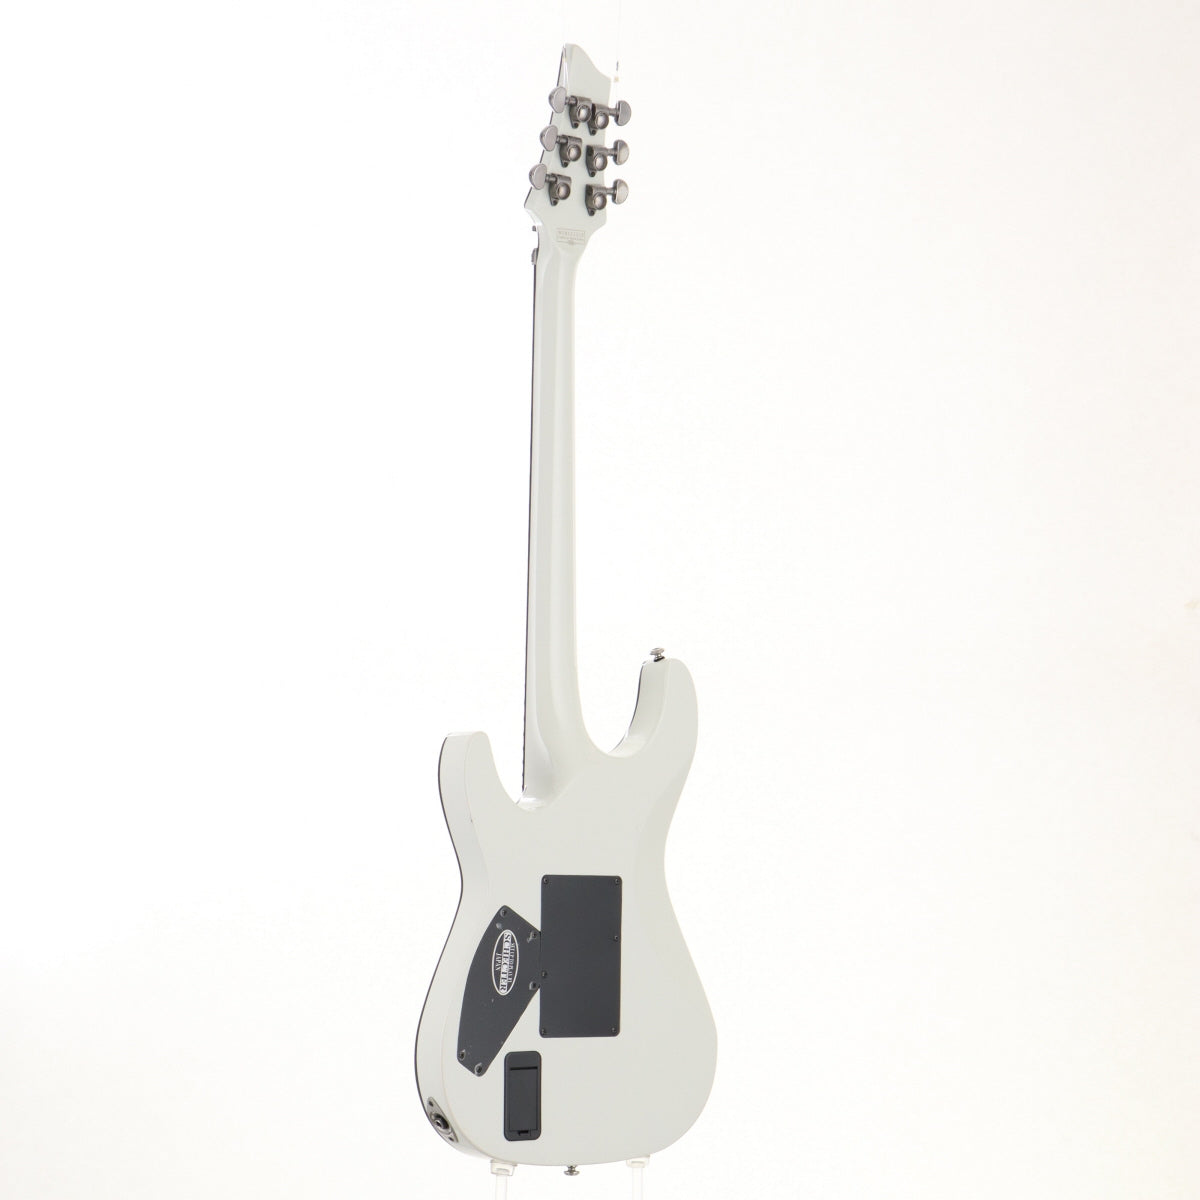 [SN W10122318] USED SCHECTER / AD-C-1-FR-HR White (Active) [3.67kg] Schecter Electric Guitar [08]